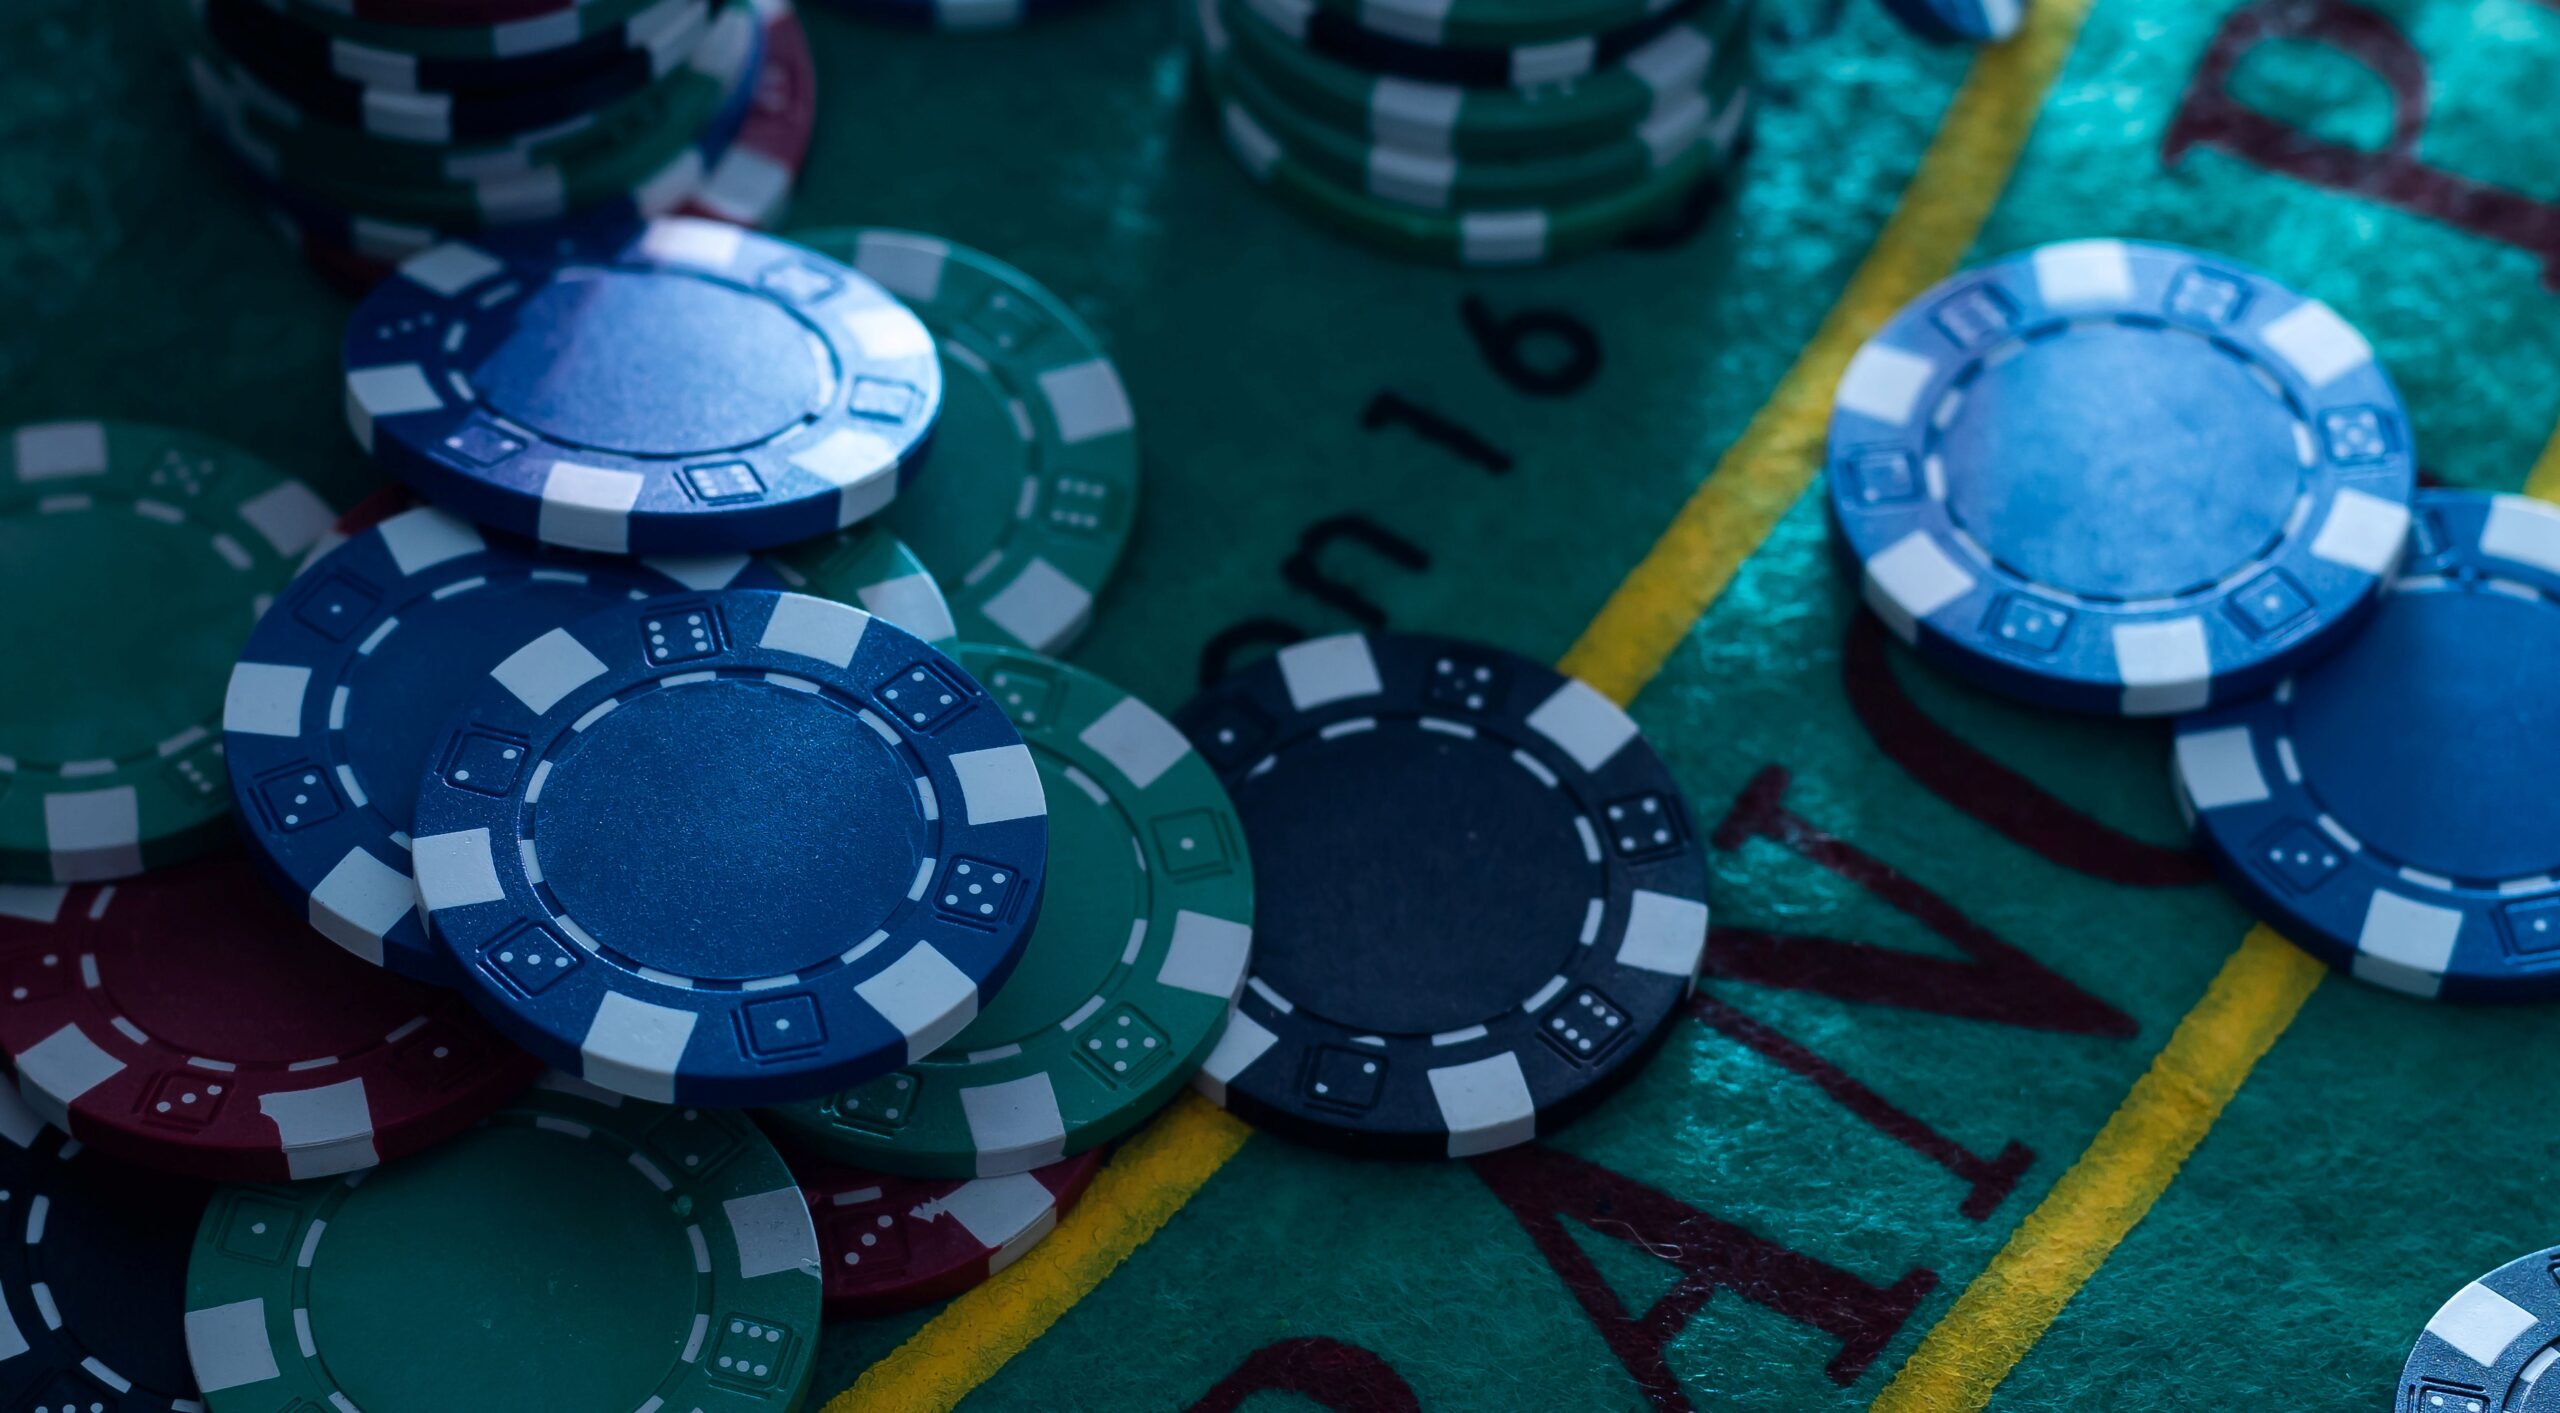 Full-scale online casino websites provide no-deposit free credits directly from the main website, bypassing agents, along with unrestricted free bonuses!!!